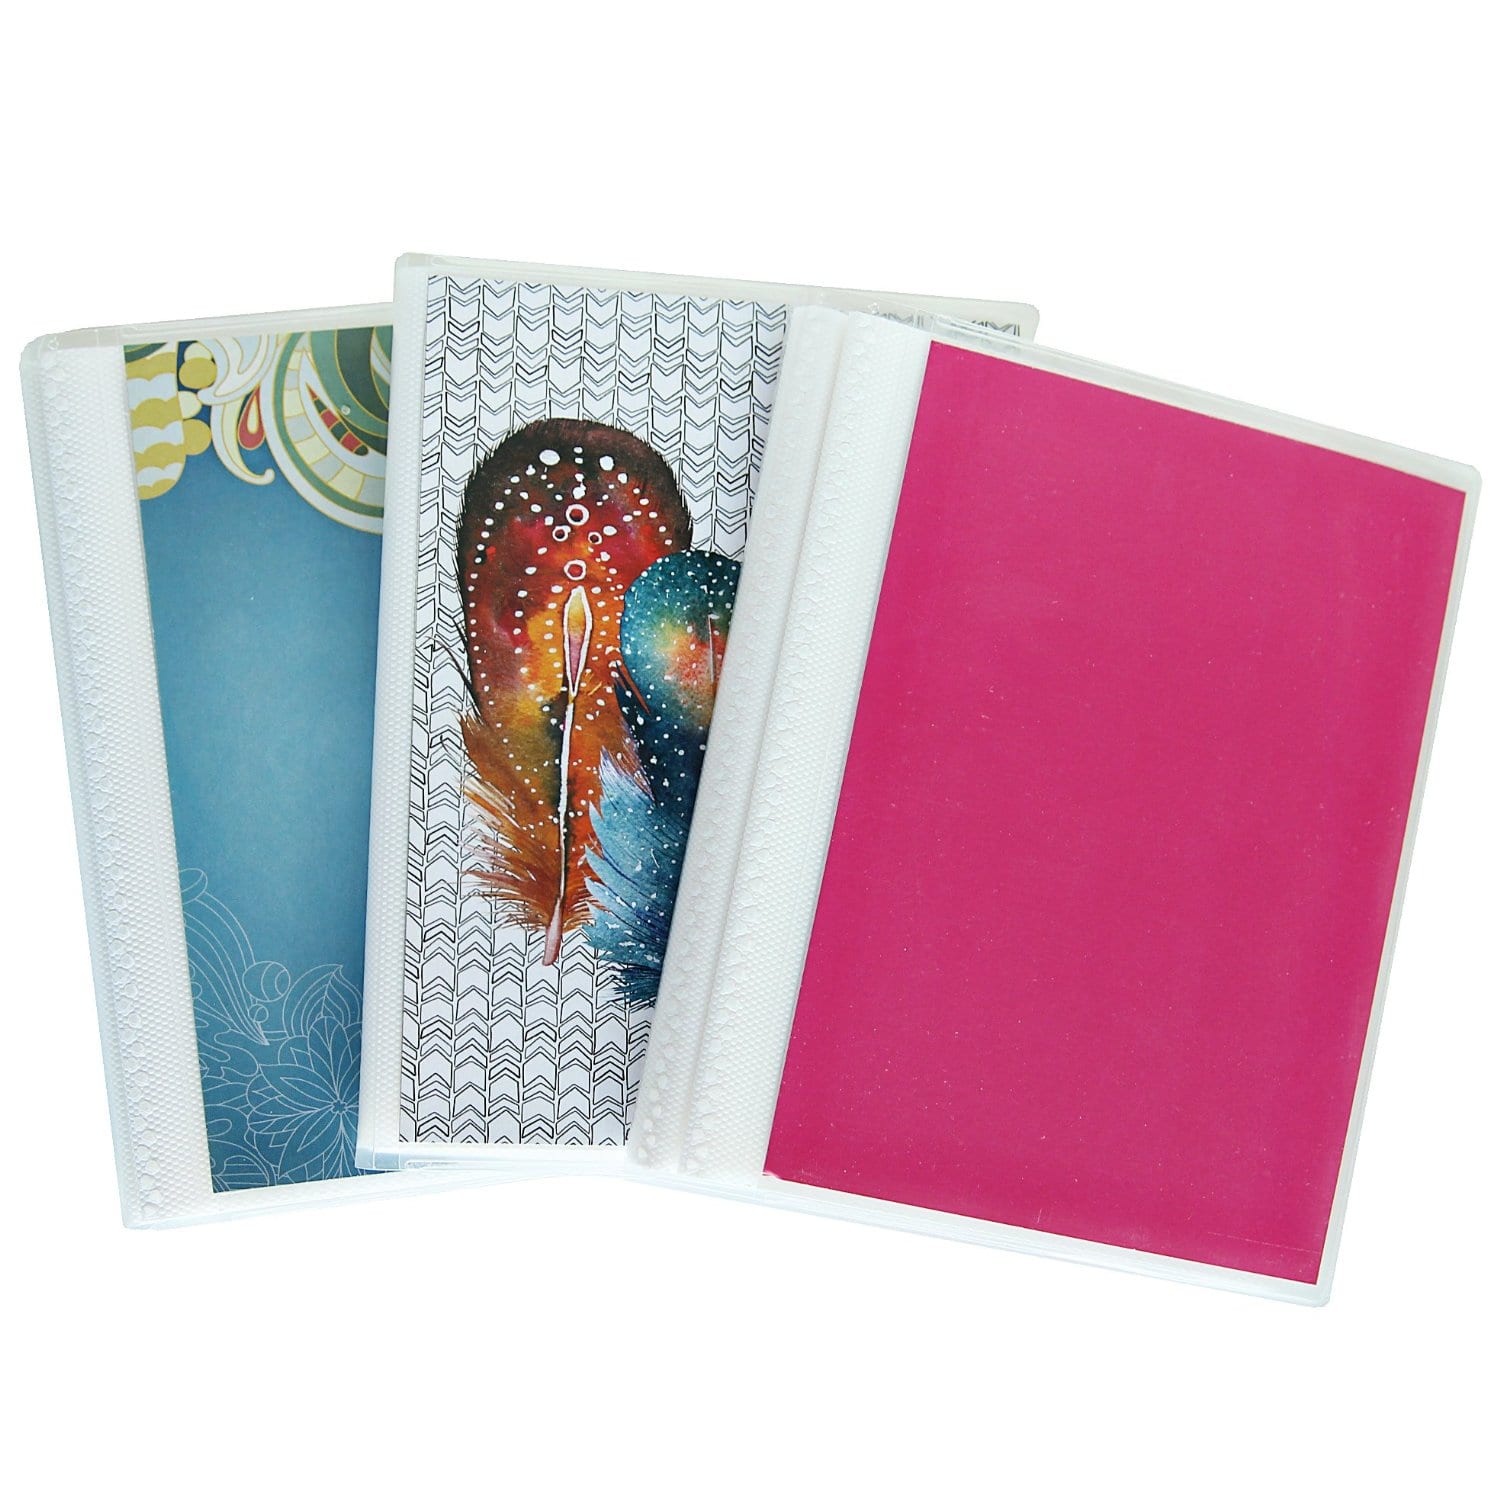 4 x 6 Photo Albums Pack of 3, Each Mini Photo Album Holds Up to 48 4x6  Photos - CocoPolka Company